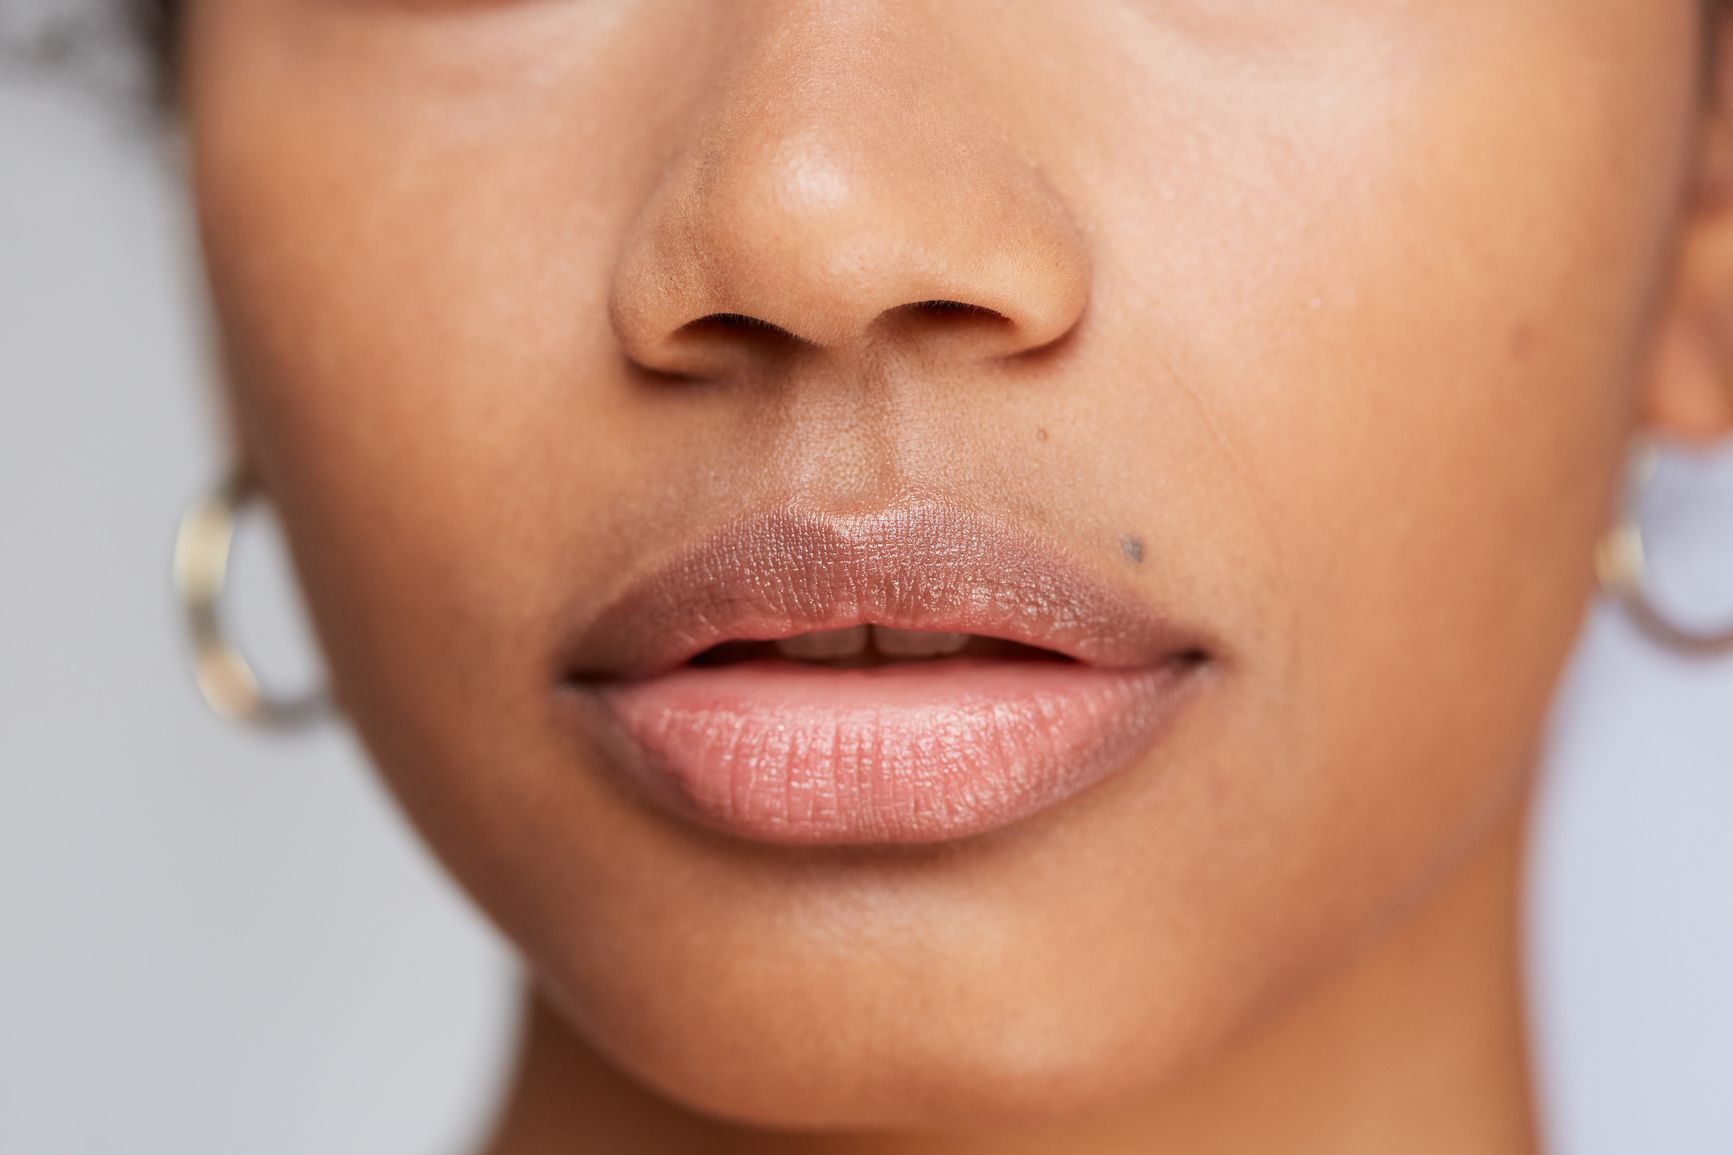 Are Beauty Straws a MYTH? Can They REALLY Prevent Lip Wrinkles? 